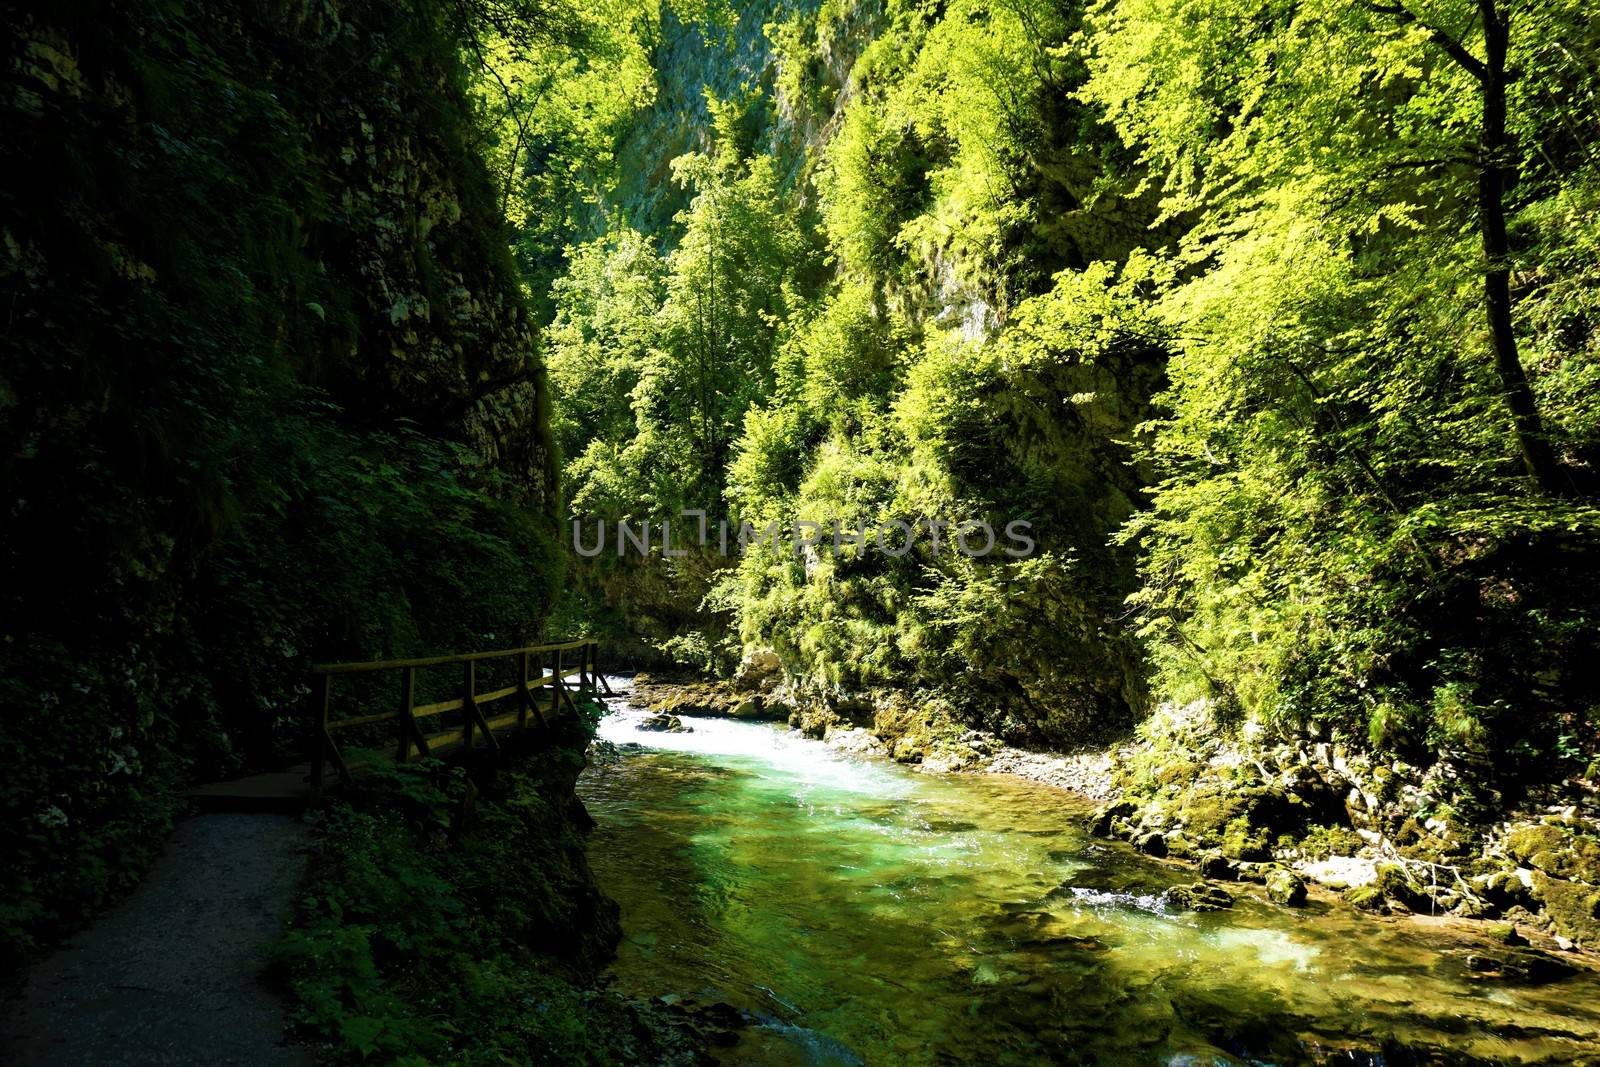 Vintgar Gorge radovna river and trees in Podhom by pisces2386